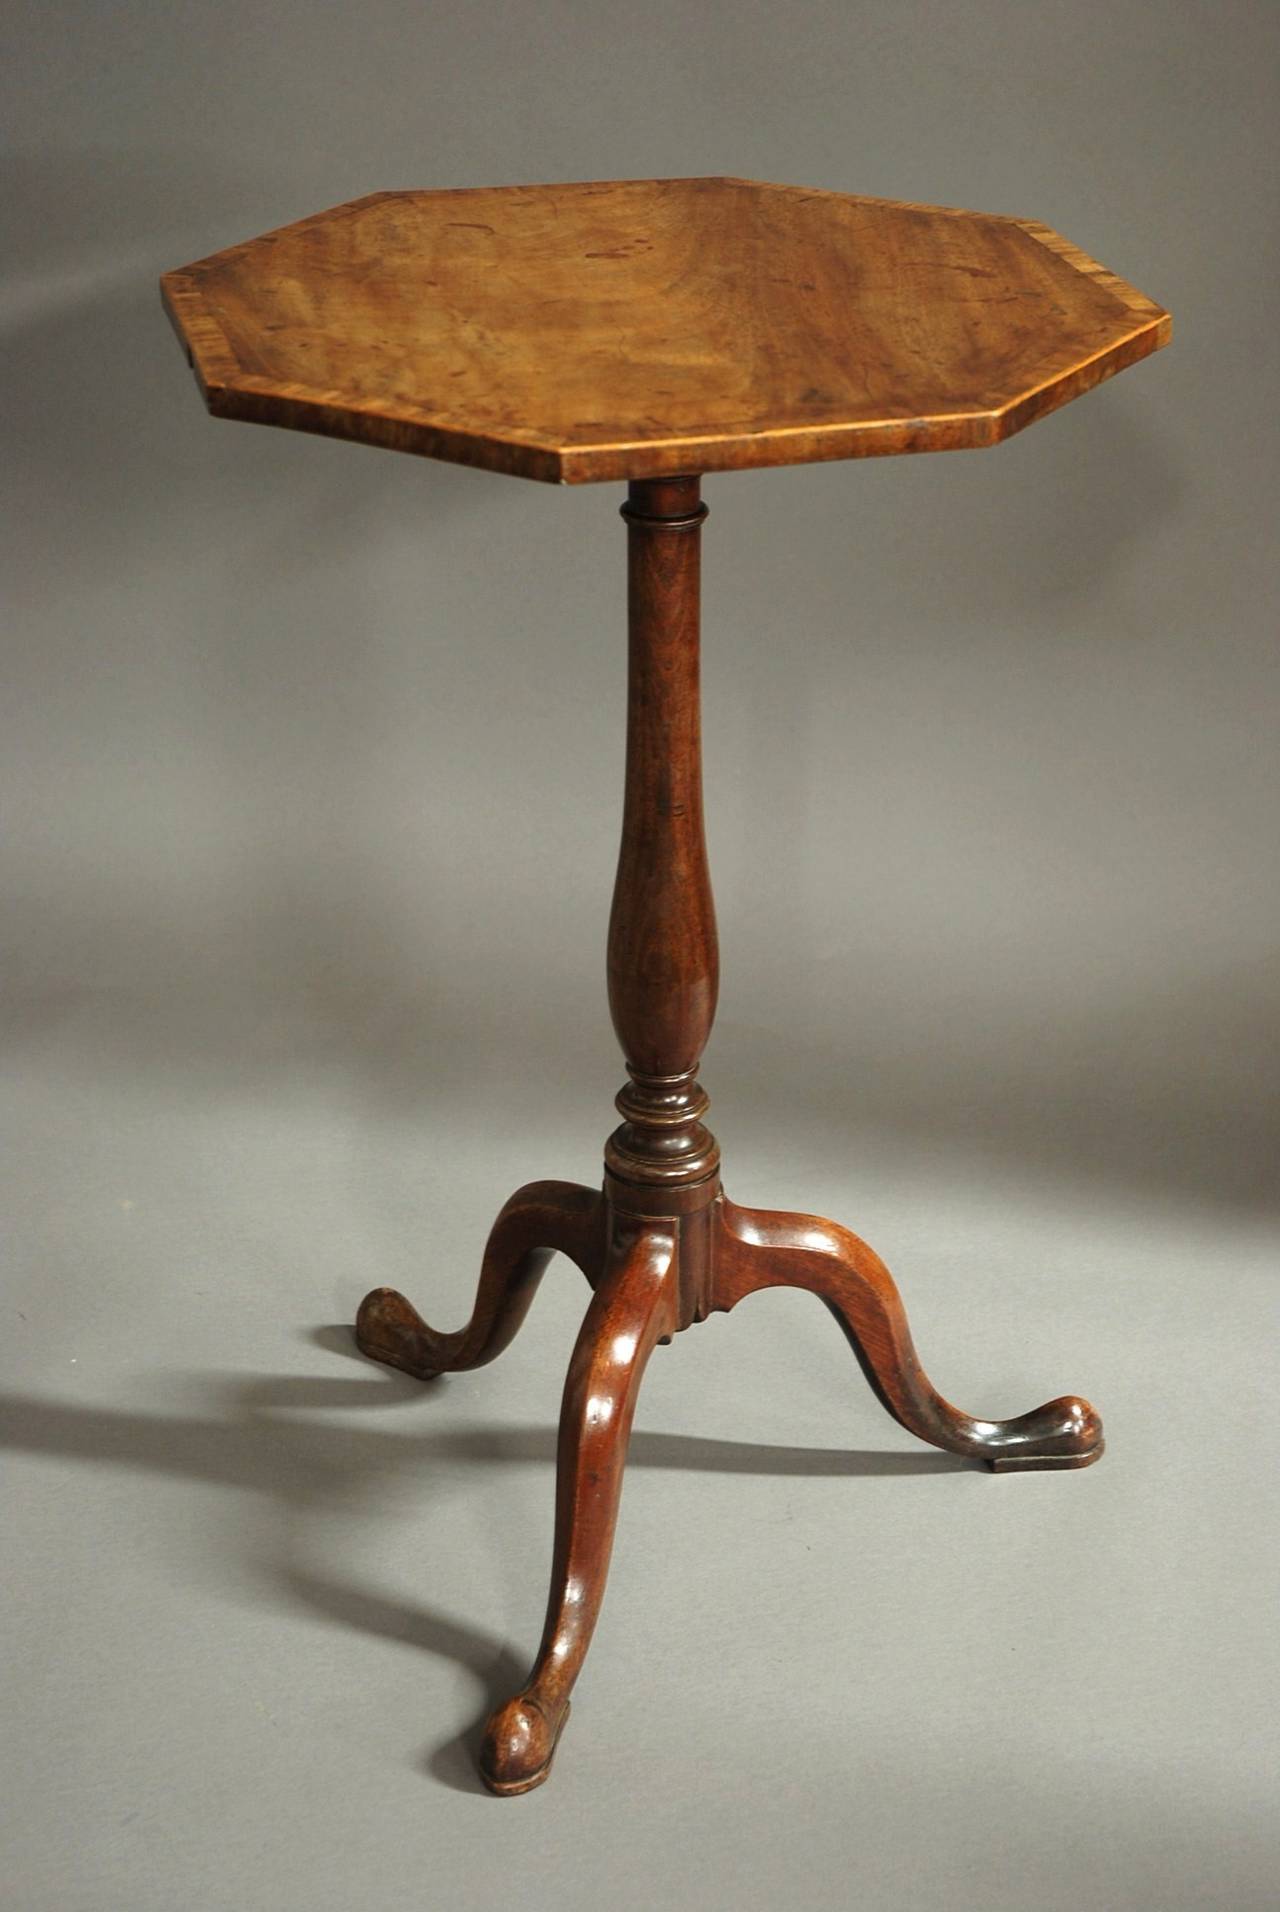 A George III octagonal mahogany tilt-top table with tri-form base of superb patina and good proportions.

This table consists of an octagonal mahogany top of superb color with a banding of mahogany and box wood stringing with a cross banded